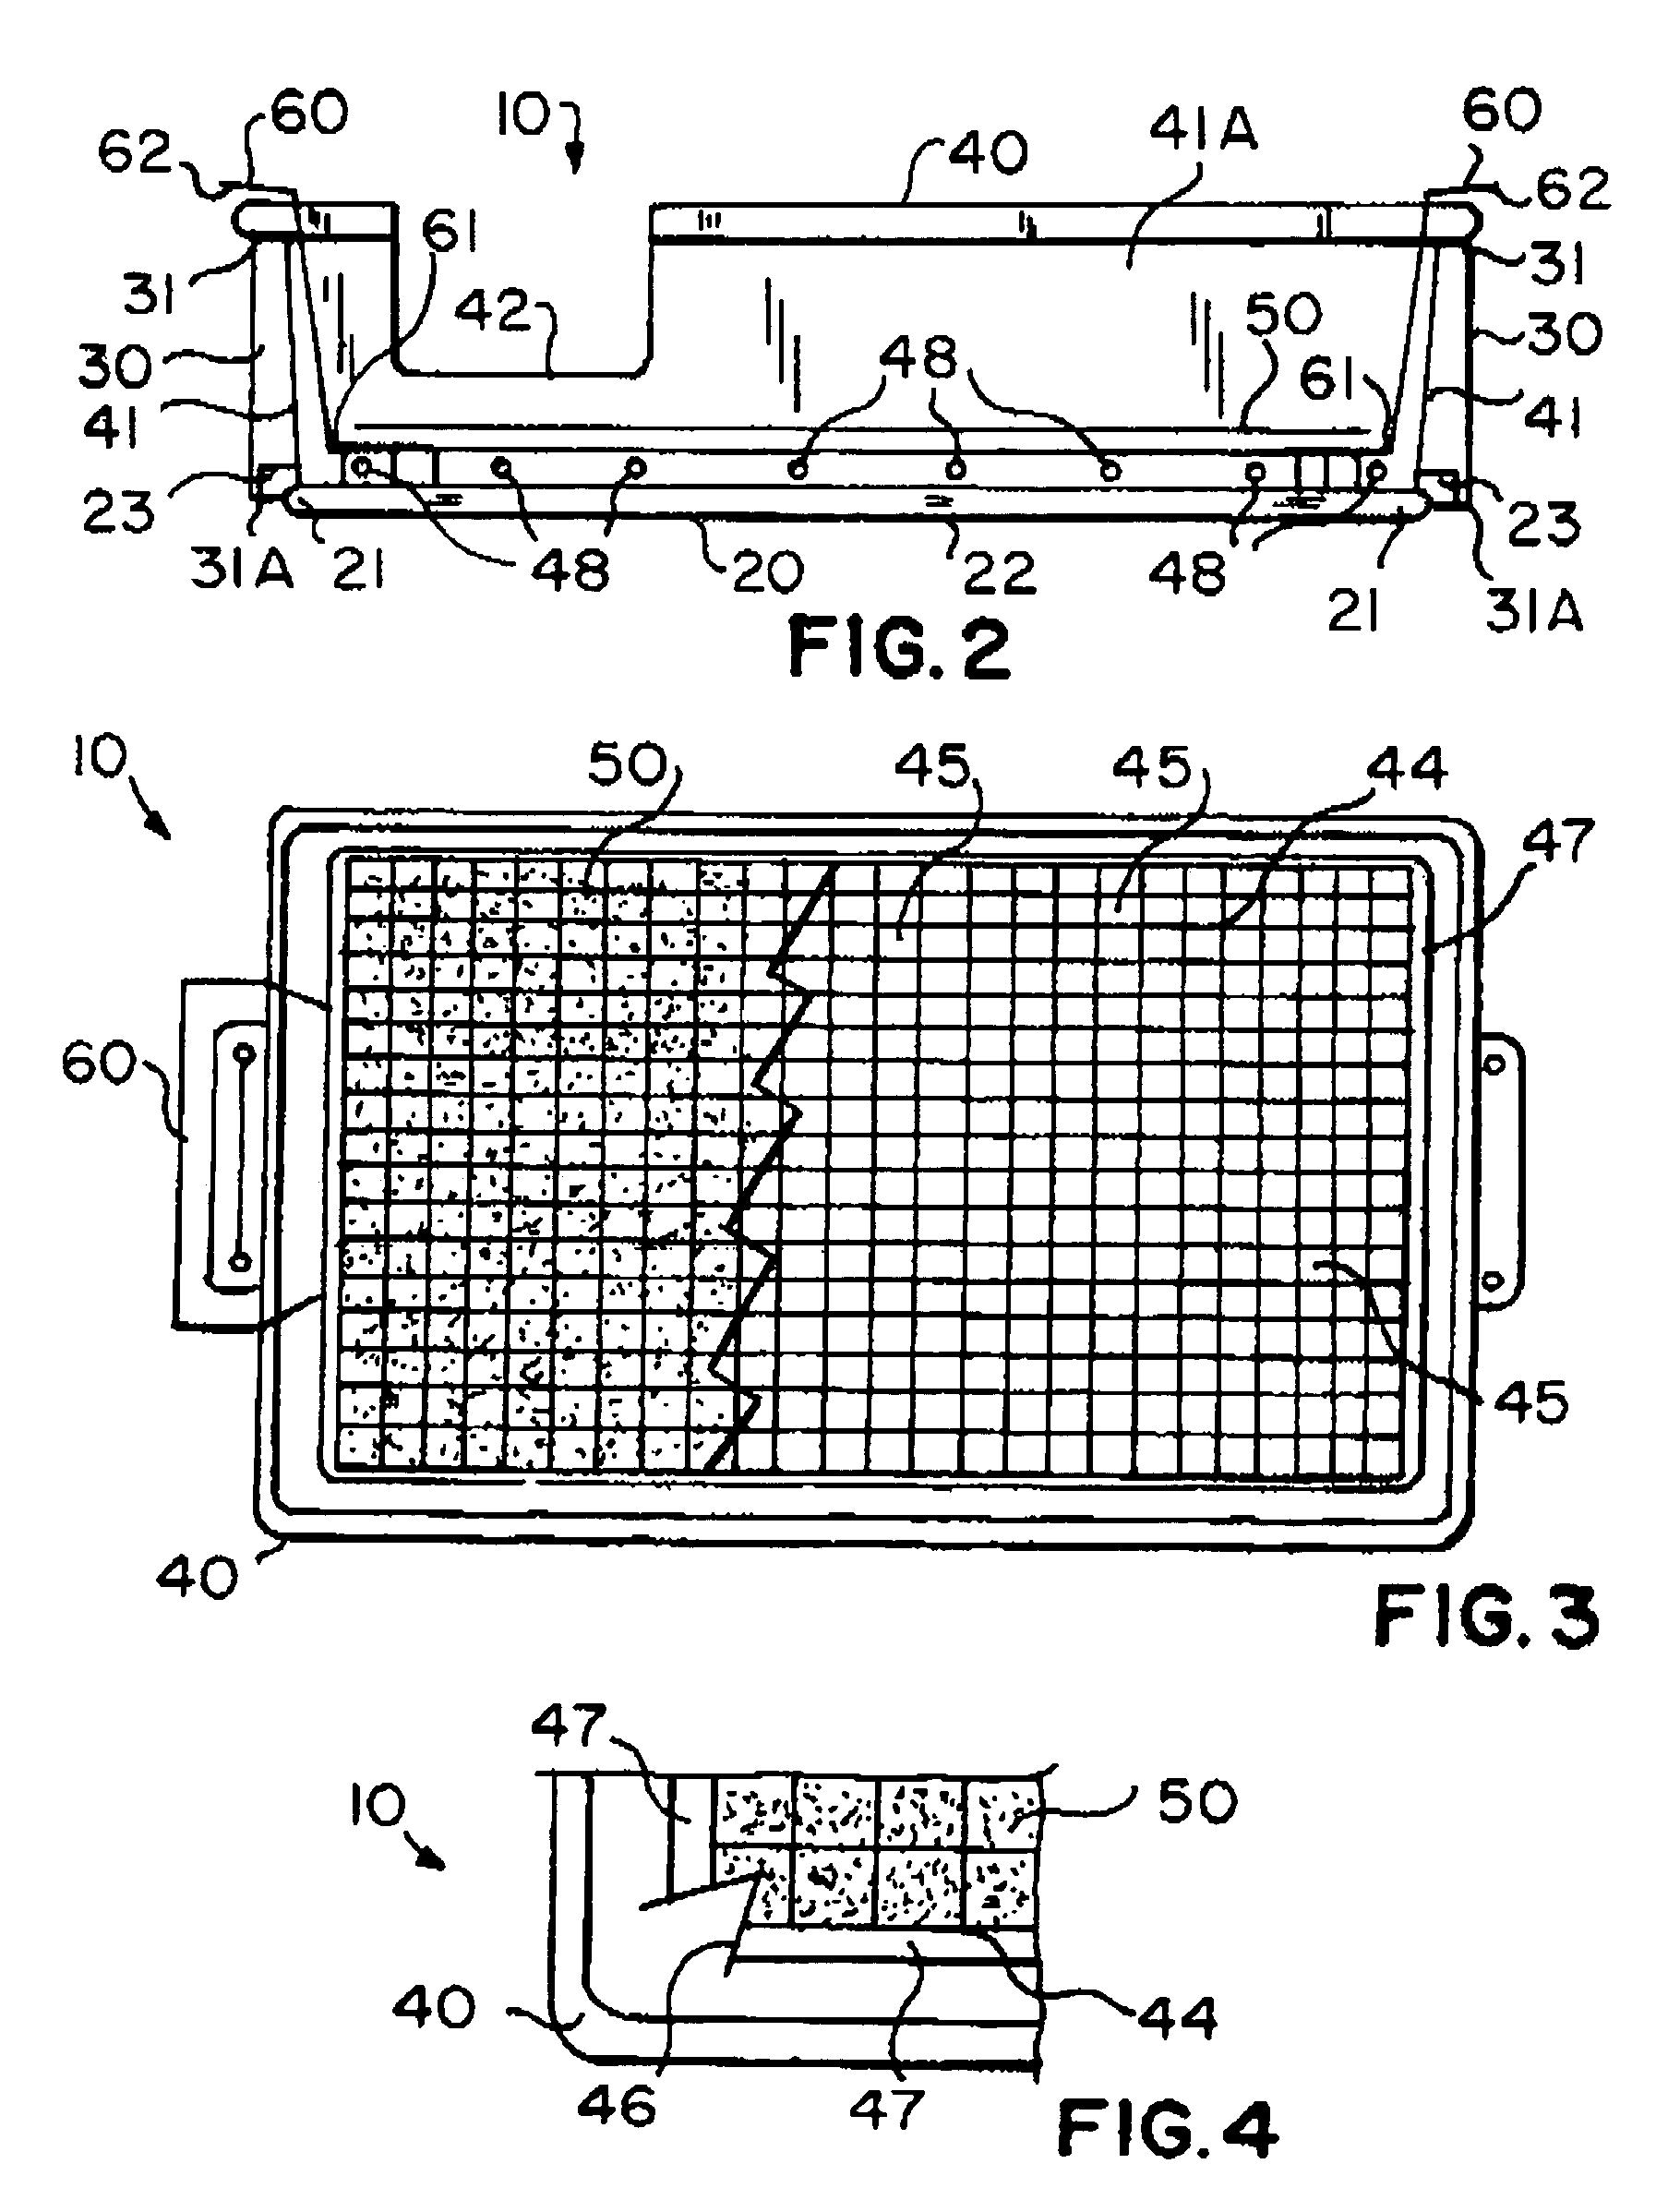 Pet waste collection apparatus